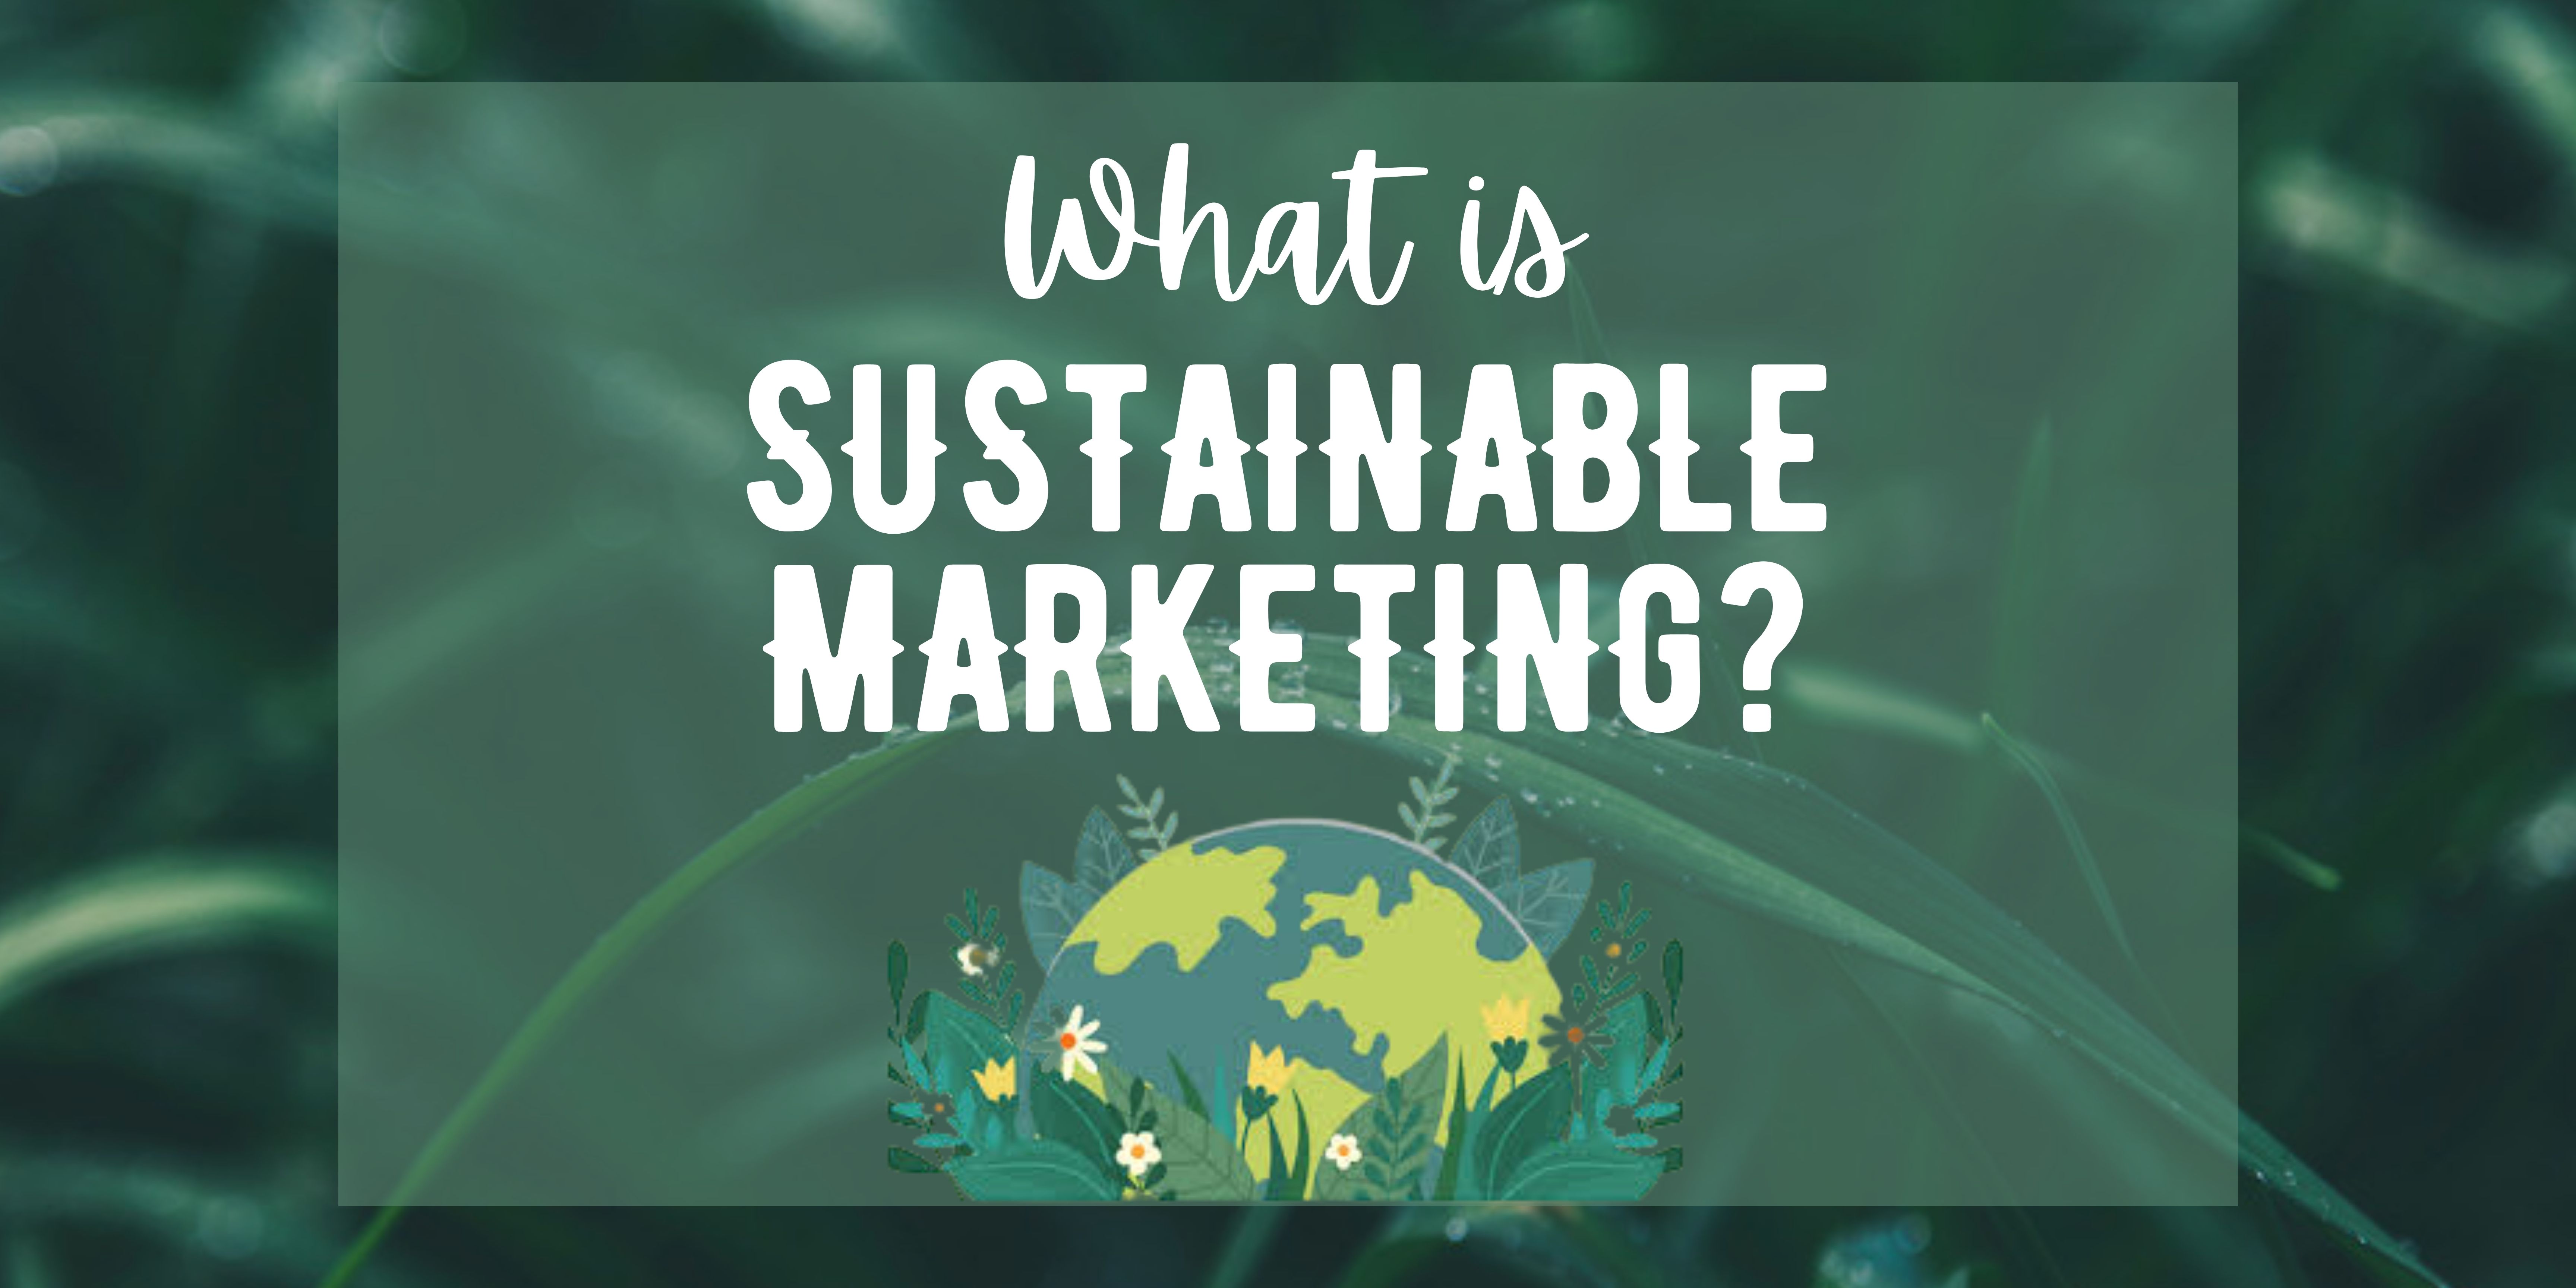 What is sustainable marketing?